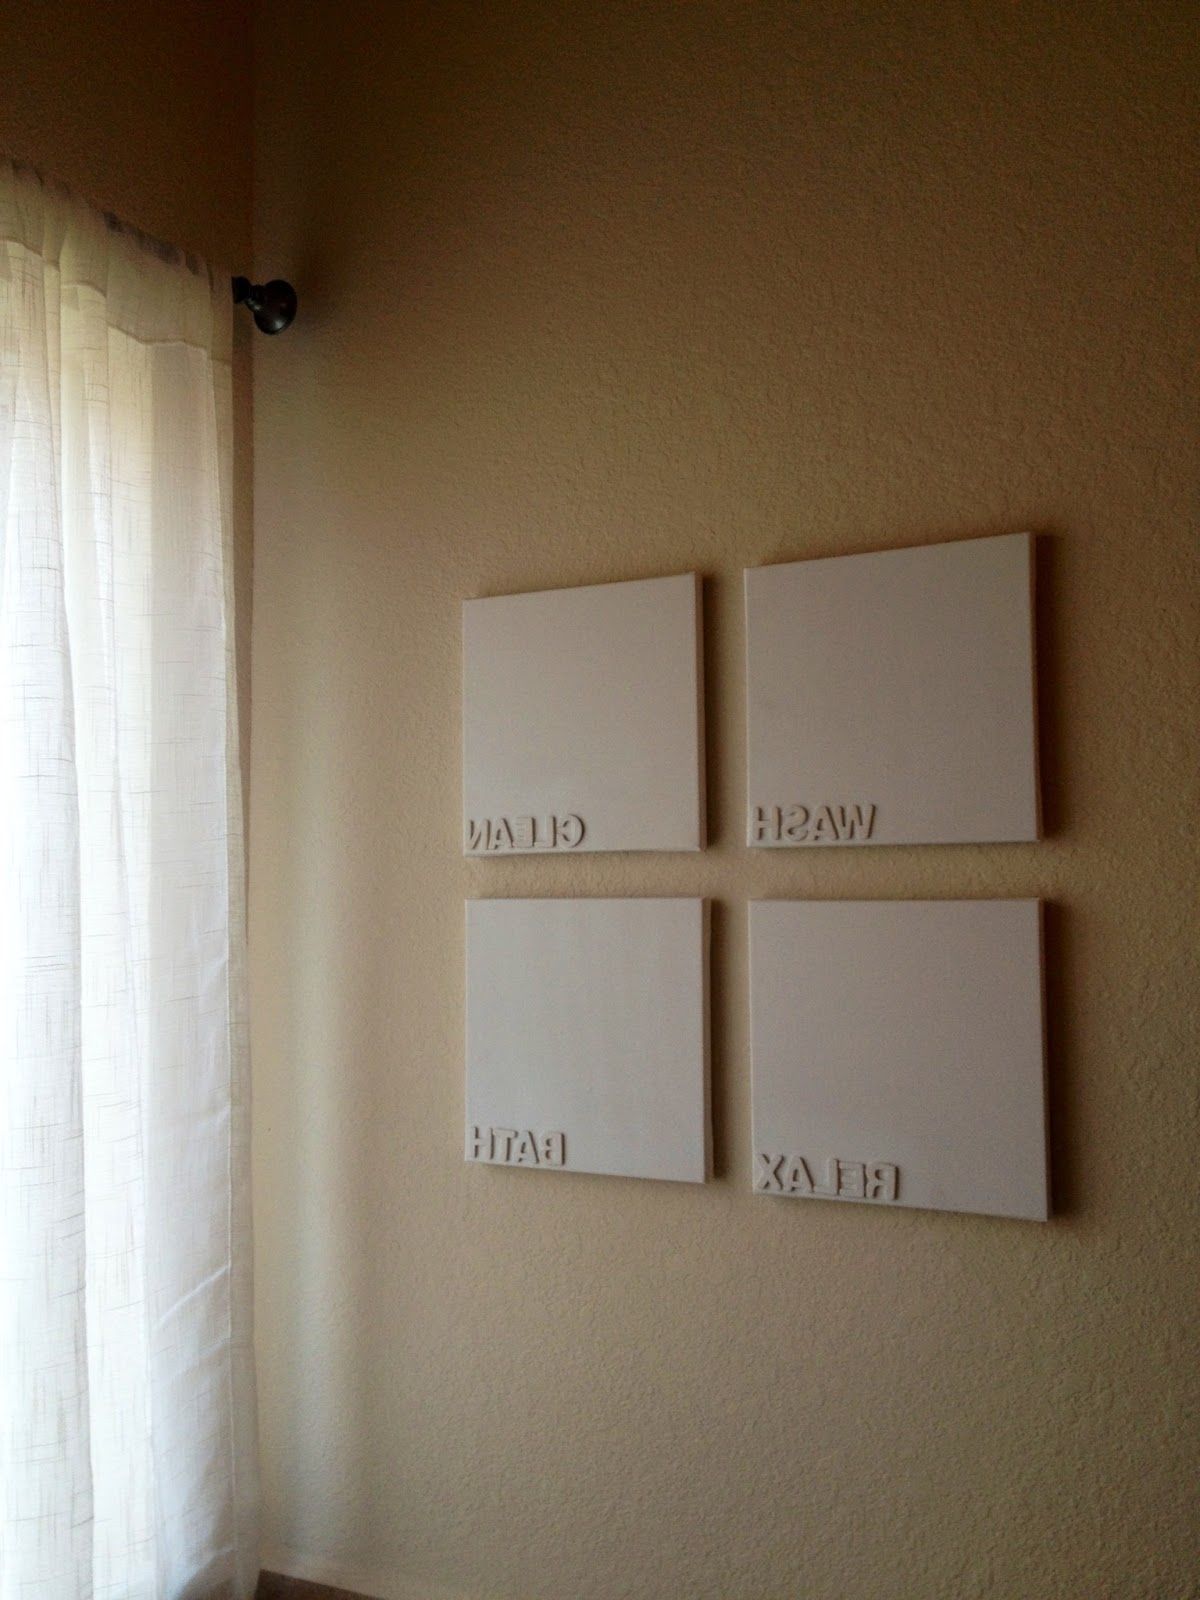 Most Recent Bathroom Wall Art – Free Online Home Decor – Techhungry In Bath Wall Art (View 15 of 15)